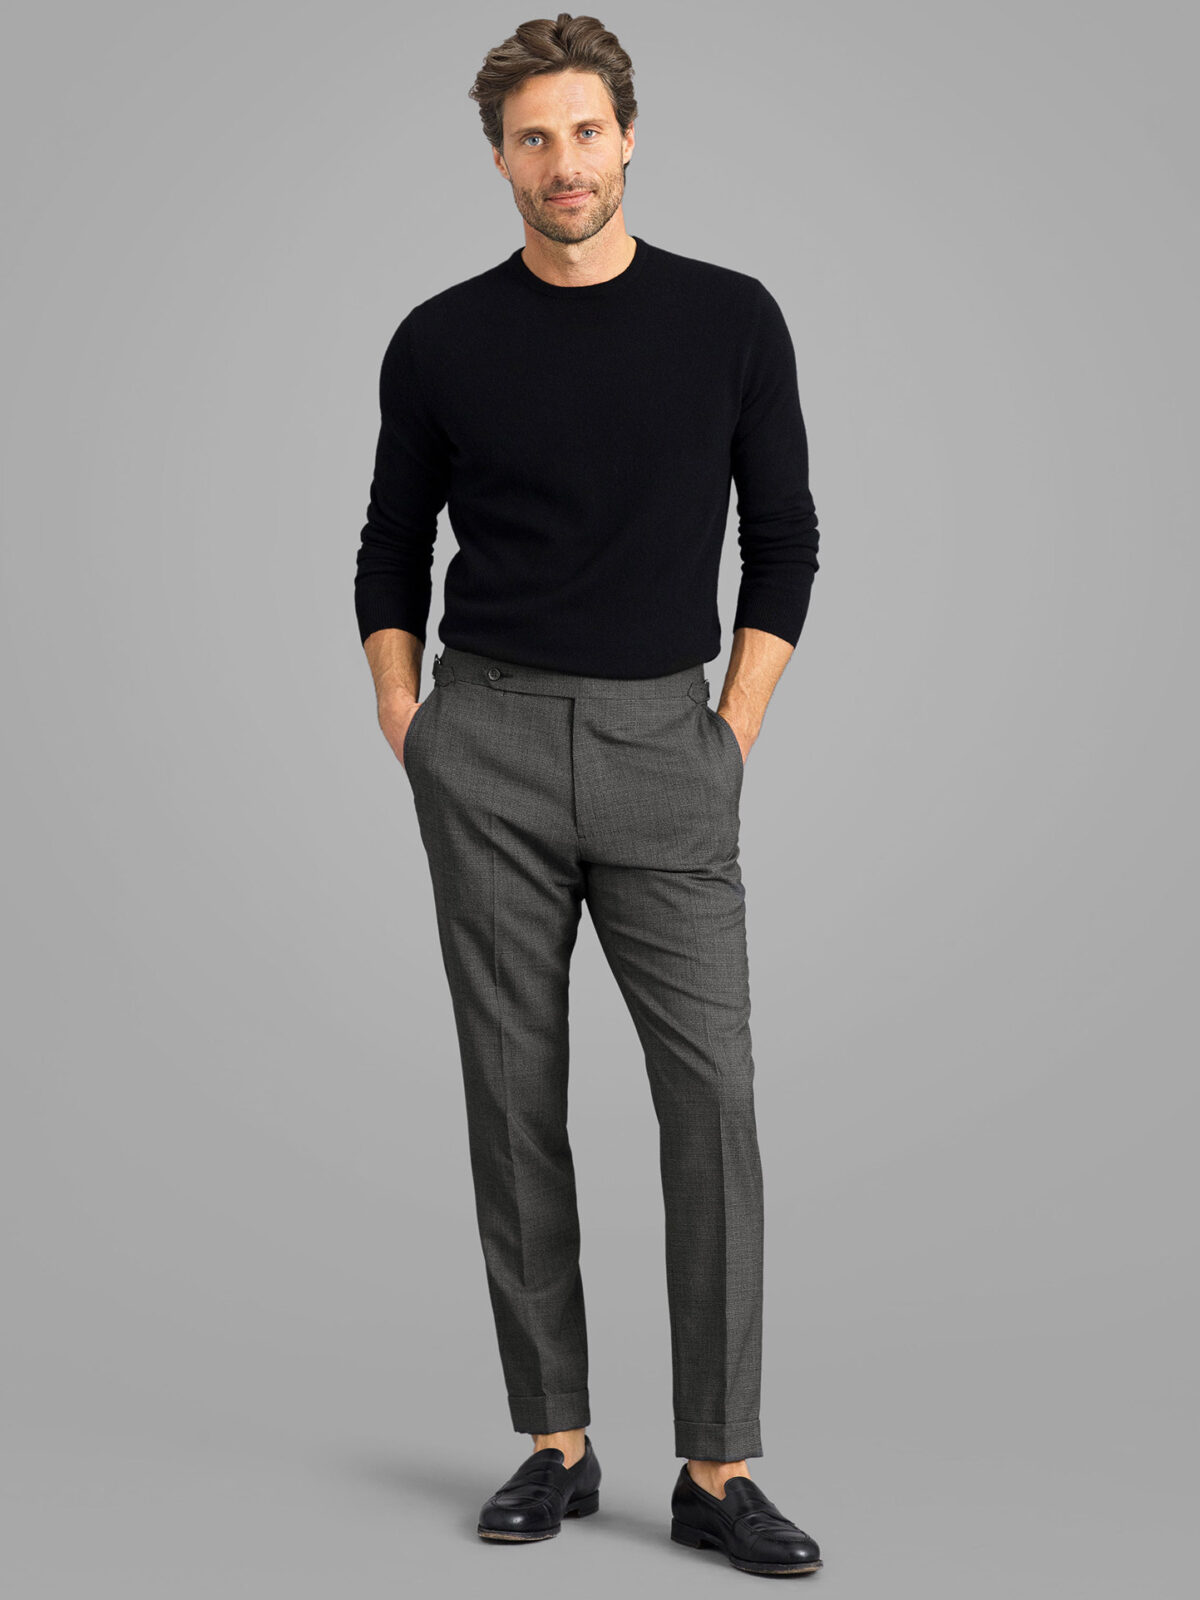 Grey Textured Weave Wool Stretch Dress Pant